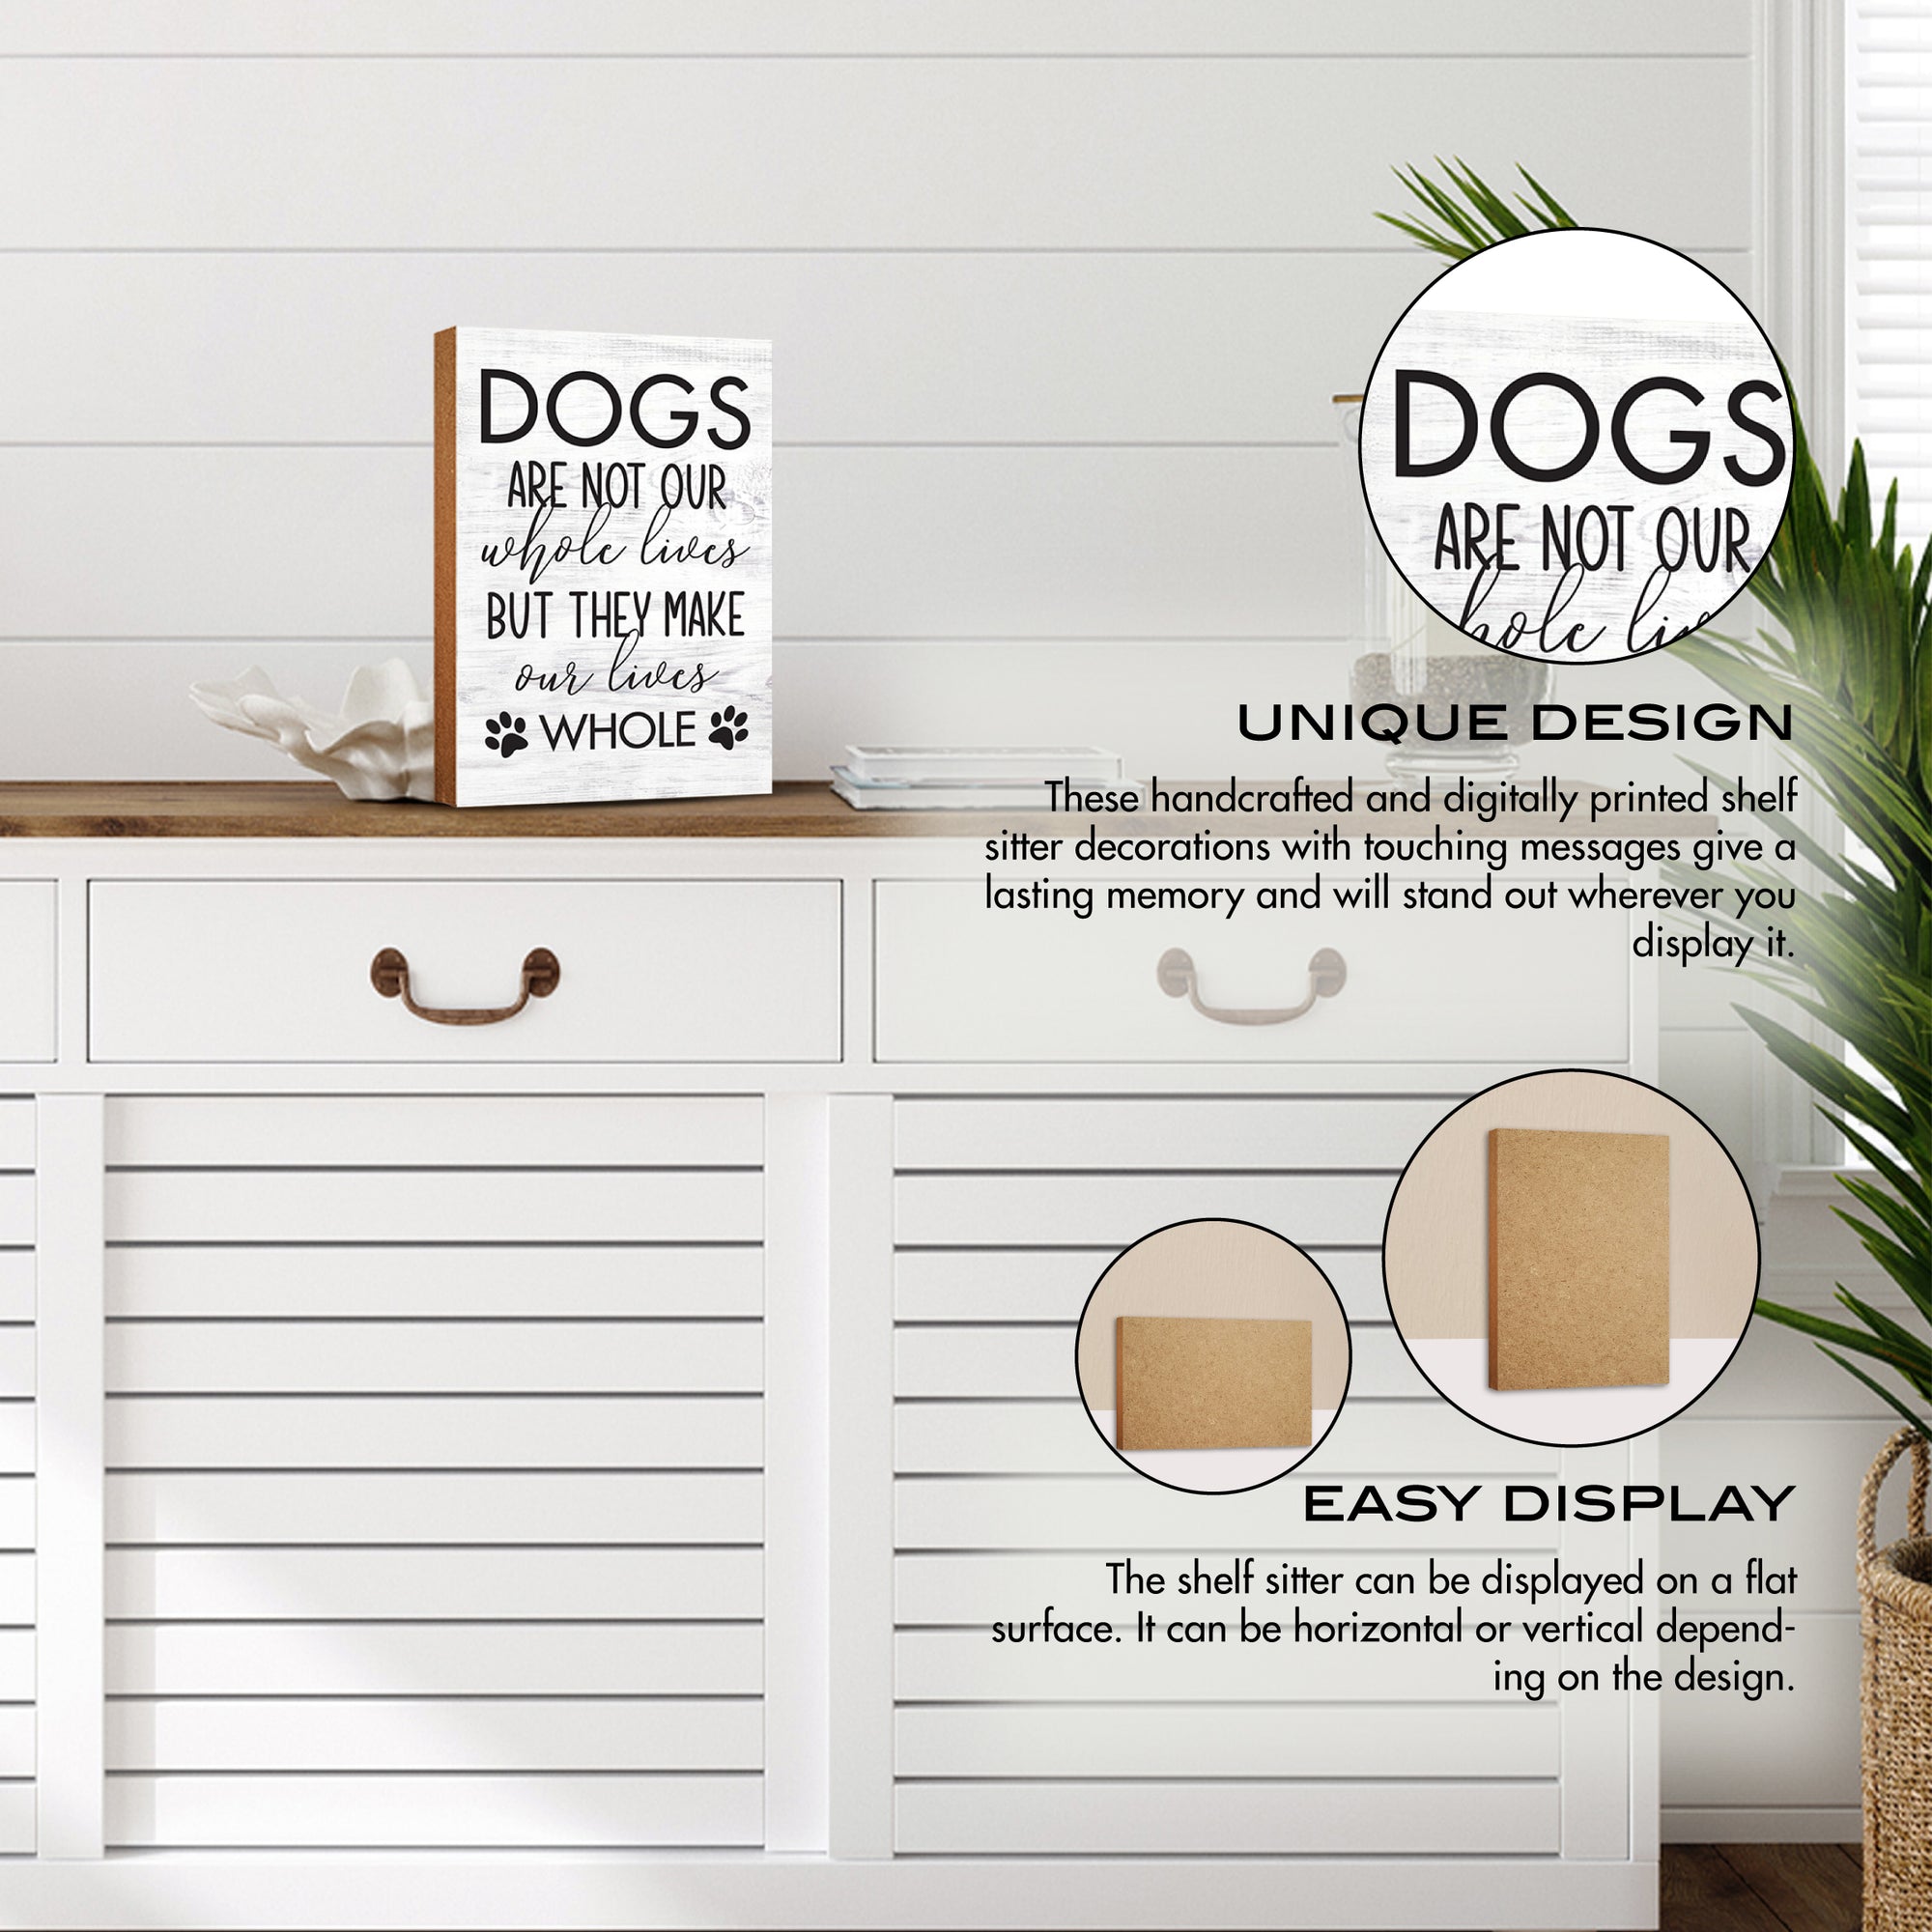 Wooden Shelf Decor and Tabletop Signs with Pet Verses - Make Our Lives Whole